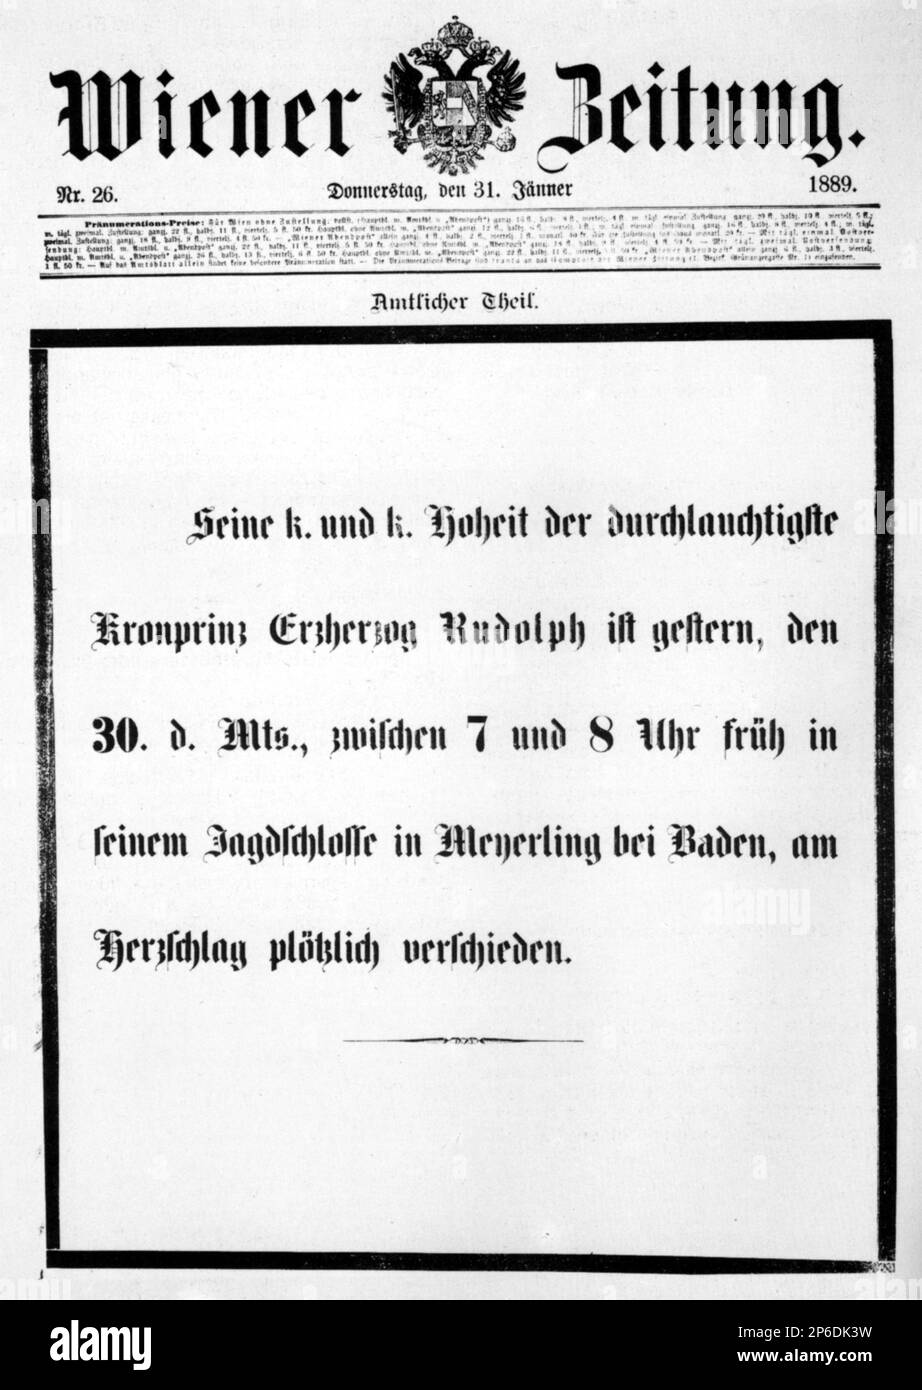 1889, 31 january , Wien , AUSTRIA : The newspaper WIENER BEITUNG with the of austrian kronprinz RUDOLF von ABSBURG ( 1850 - committed suicide at Mayerling 1889 ) new of dead  , lover of Mary Von Vetsera , son of Kaiser Franz Josef ( 1830 - 1916 ) , Emperor of Austria , King of Hungary and Bohemia and Empress Elisabeth von Bayer ( SISSI , 1937 - 1898 ).   - FRANCESCO GIUSEPPE - JOSEPH - ABSBURG - ASBURG - ASBURGO - NOBILITY - NOBILI - Nobiltà - REALI - HABSBURG - HASBURG - ROYALTY - quotidiano - giornale - principe ereditario - RODOLFO  ----  Archivio GBB Stock Photo